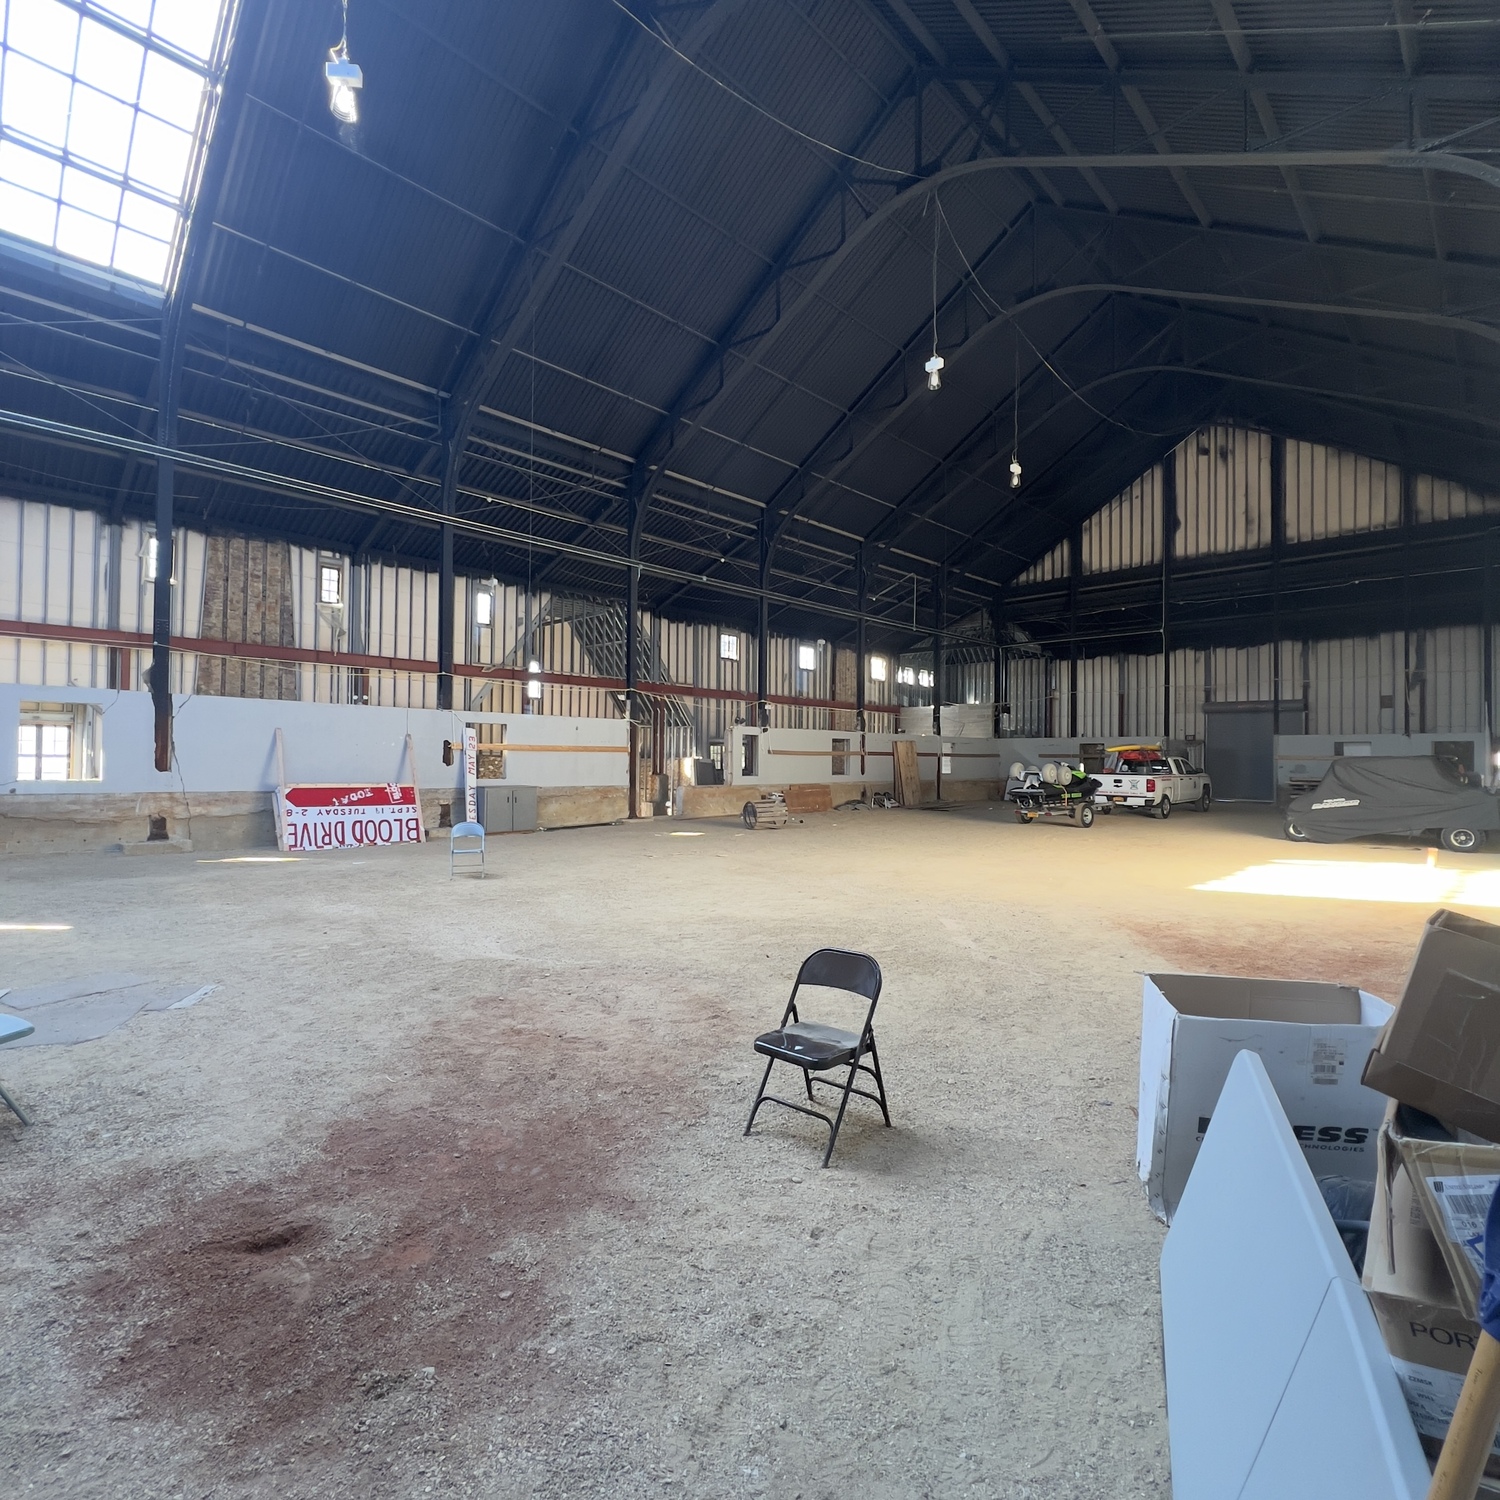 Half of the current Montauk Playhouse building has stood empty since the other half was renovated in 2006, awaiting the vision of a community swimming pool facility that is now coming to fruition. DOUG KUNTZ